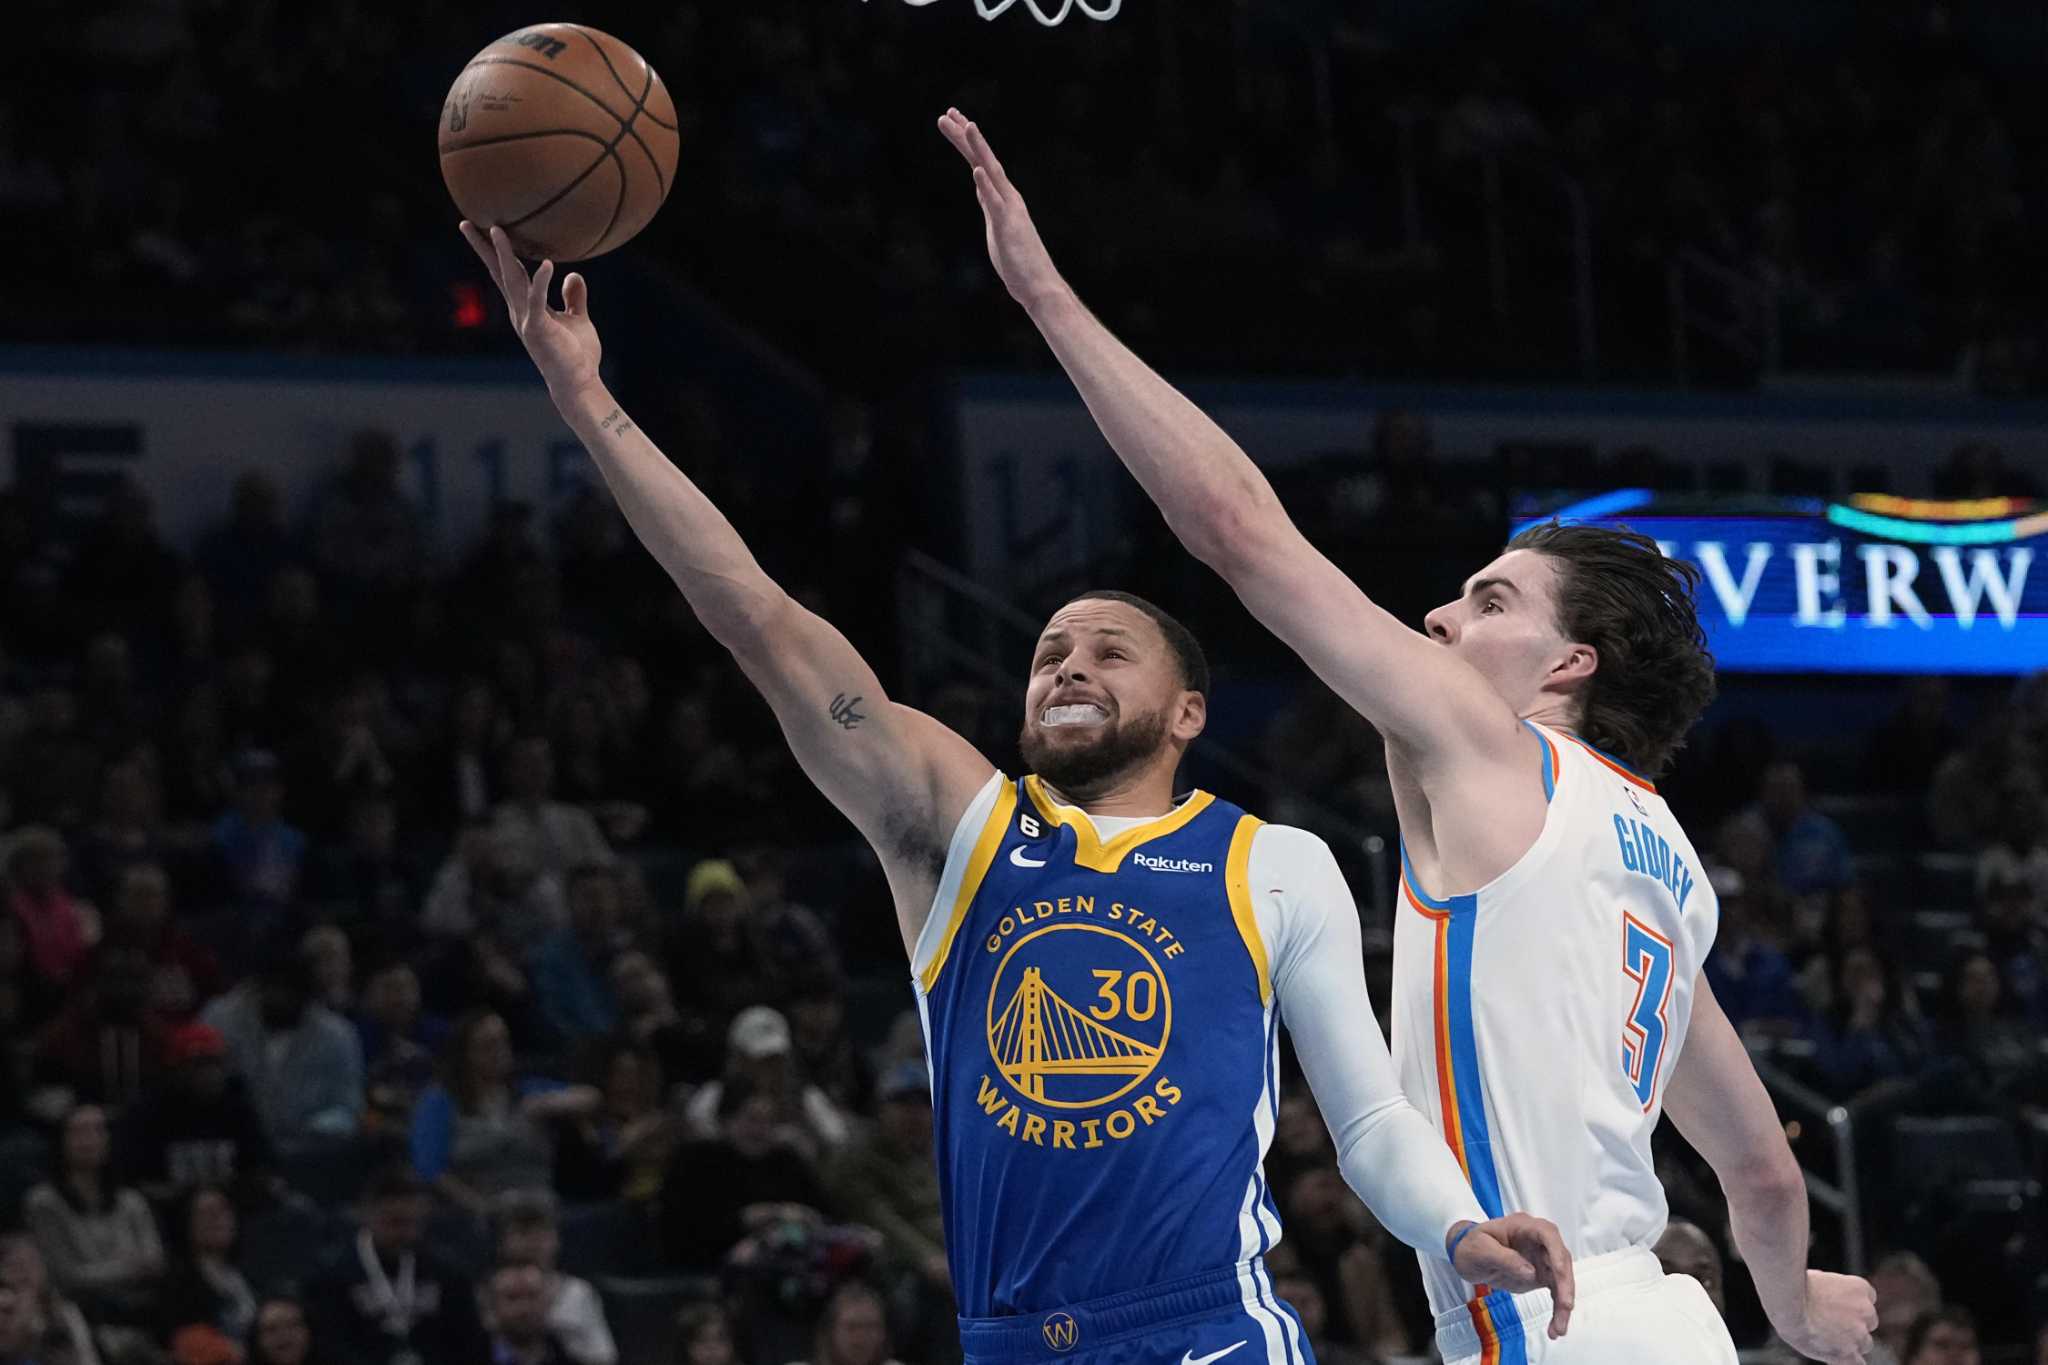 Warriors come out firing, then hold on to beat Thunder 128-120 - San Francisco Chronicle